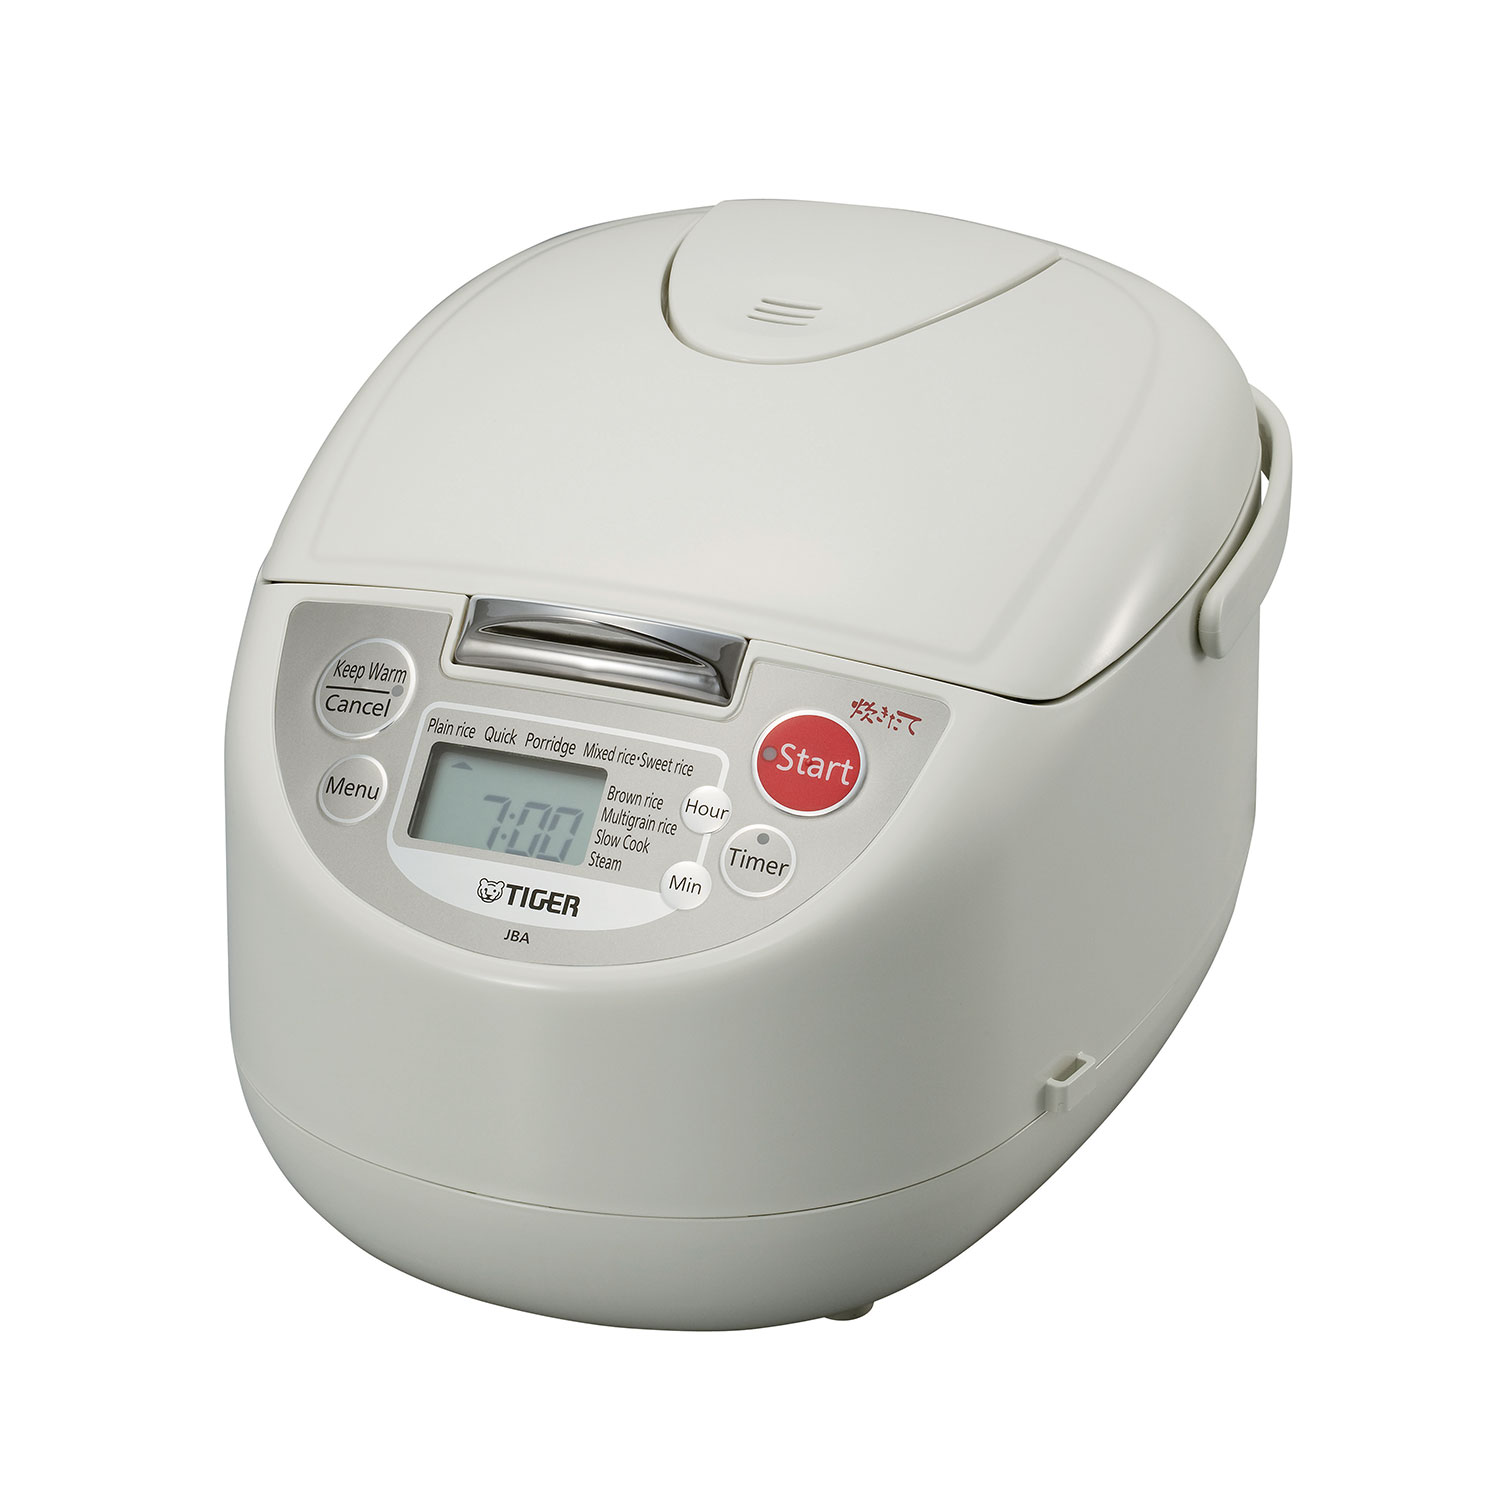 Where can you purchase a rice cooker?